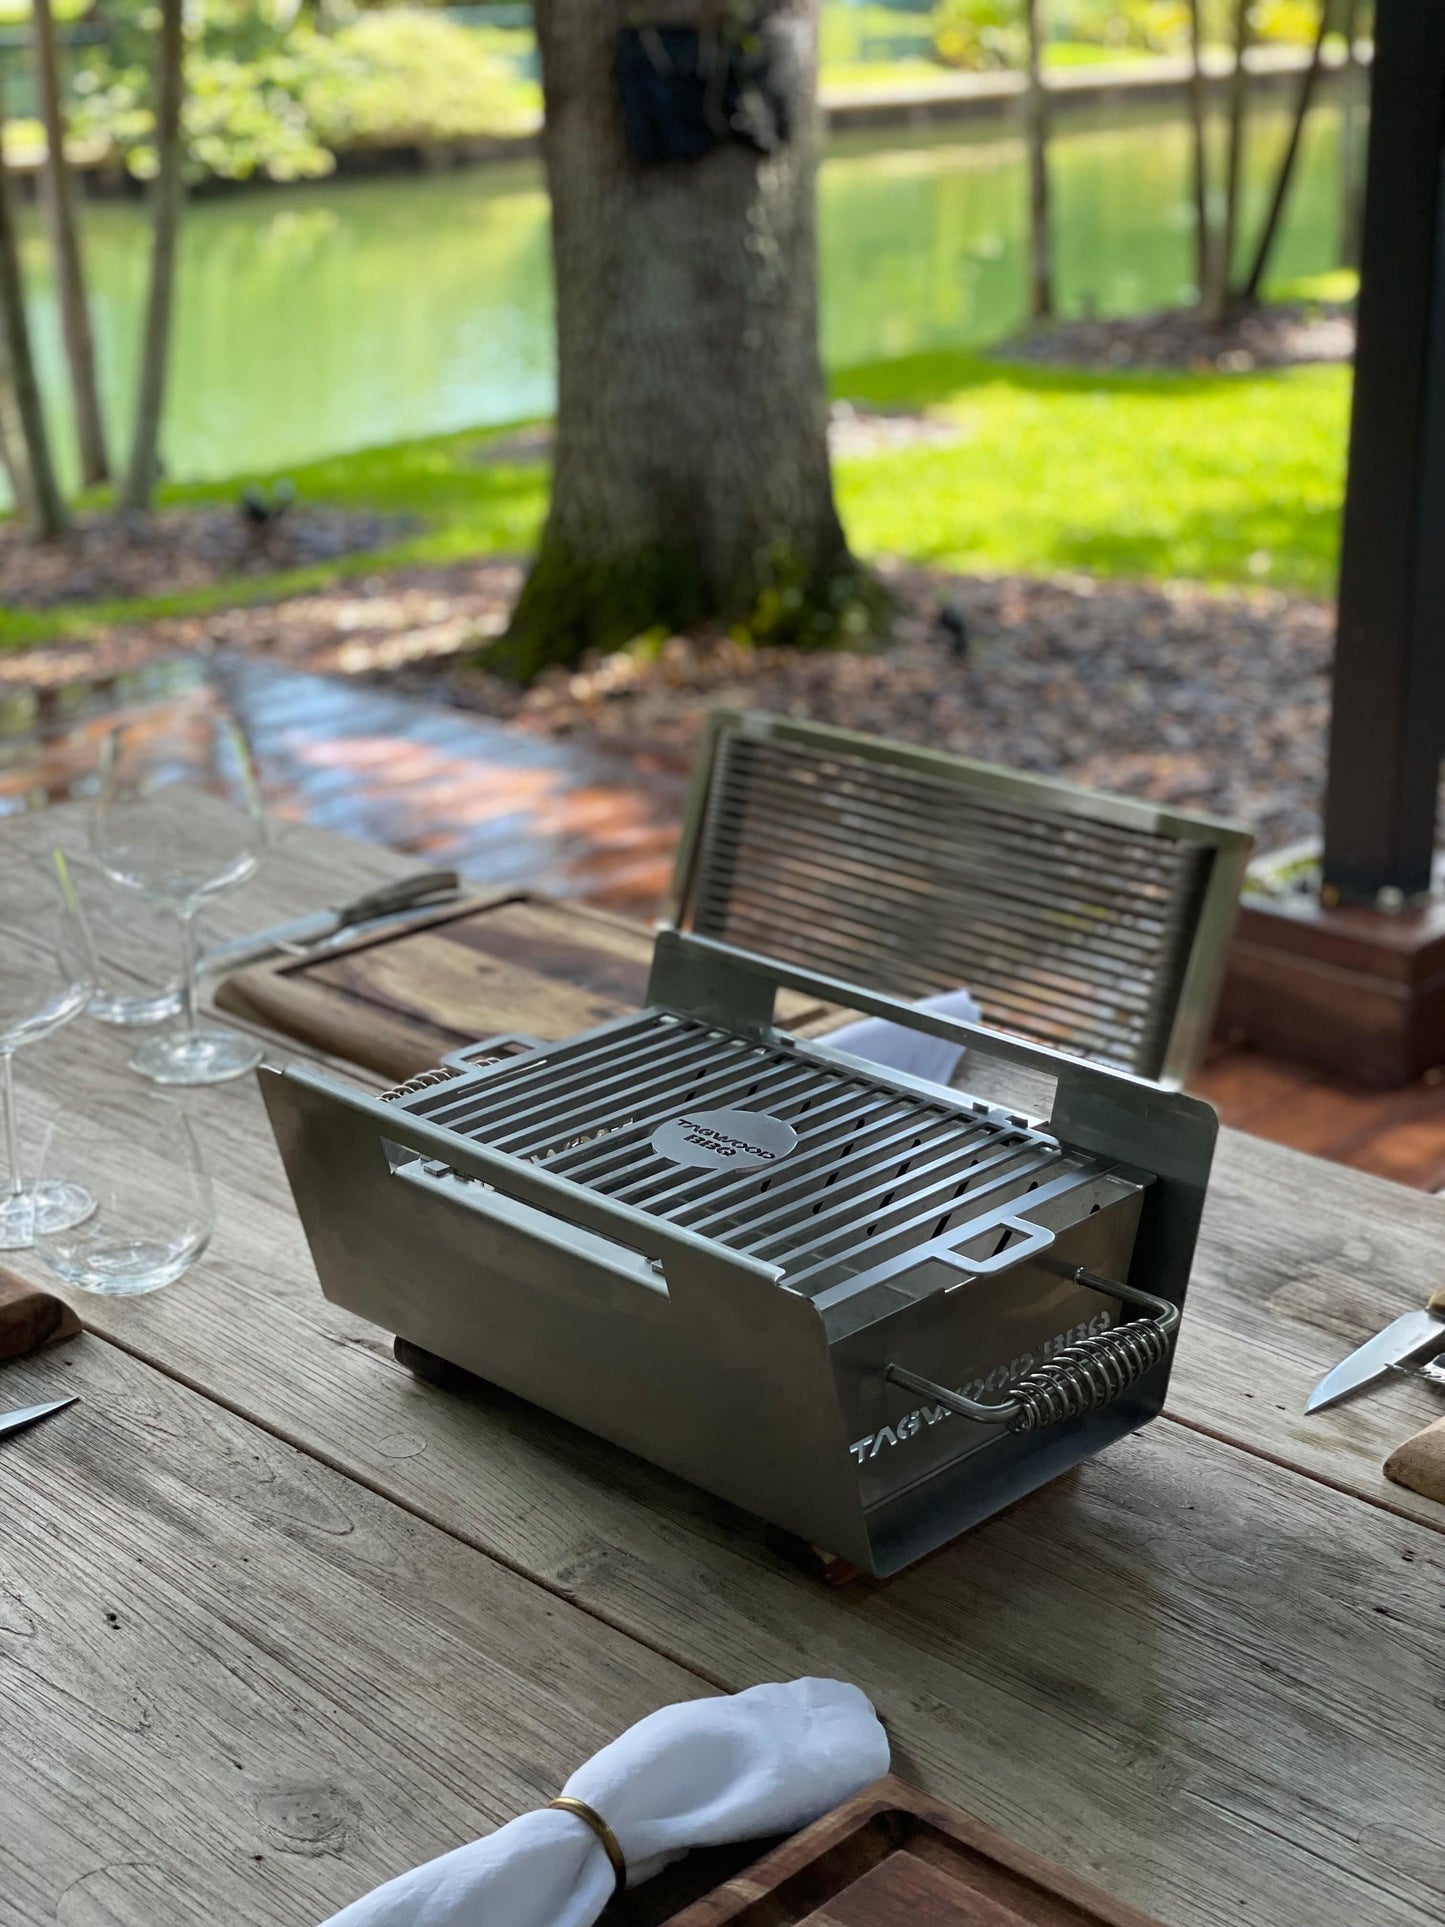 Tagwood BBQ Table Top Warming Brazier | Stainless steel and Acacia wood  | BBQ07SS--